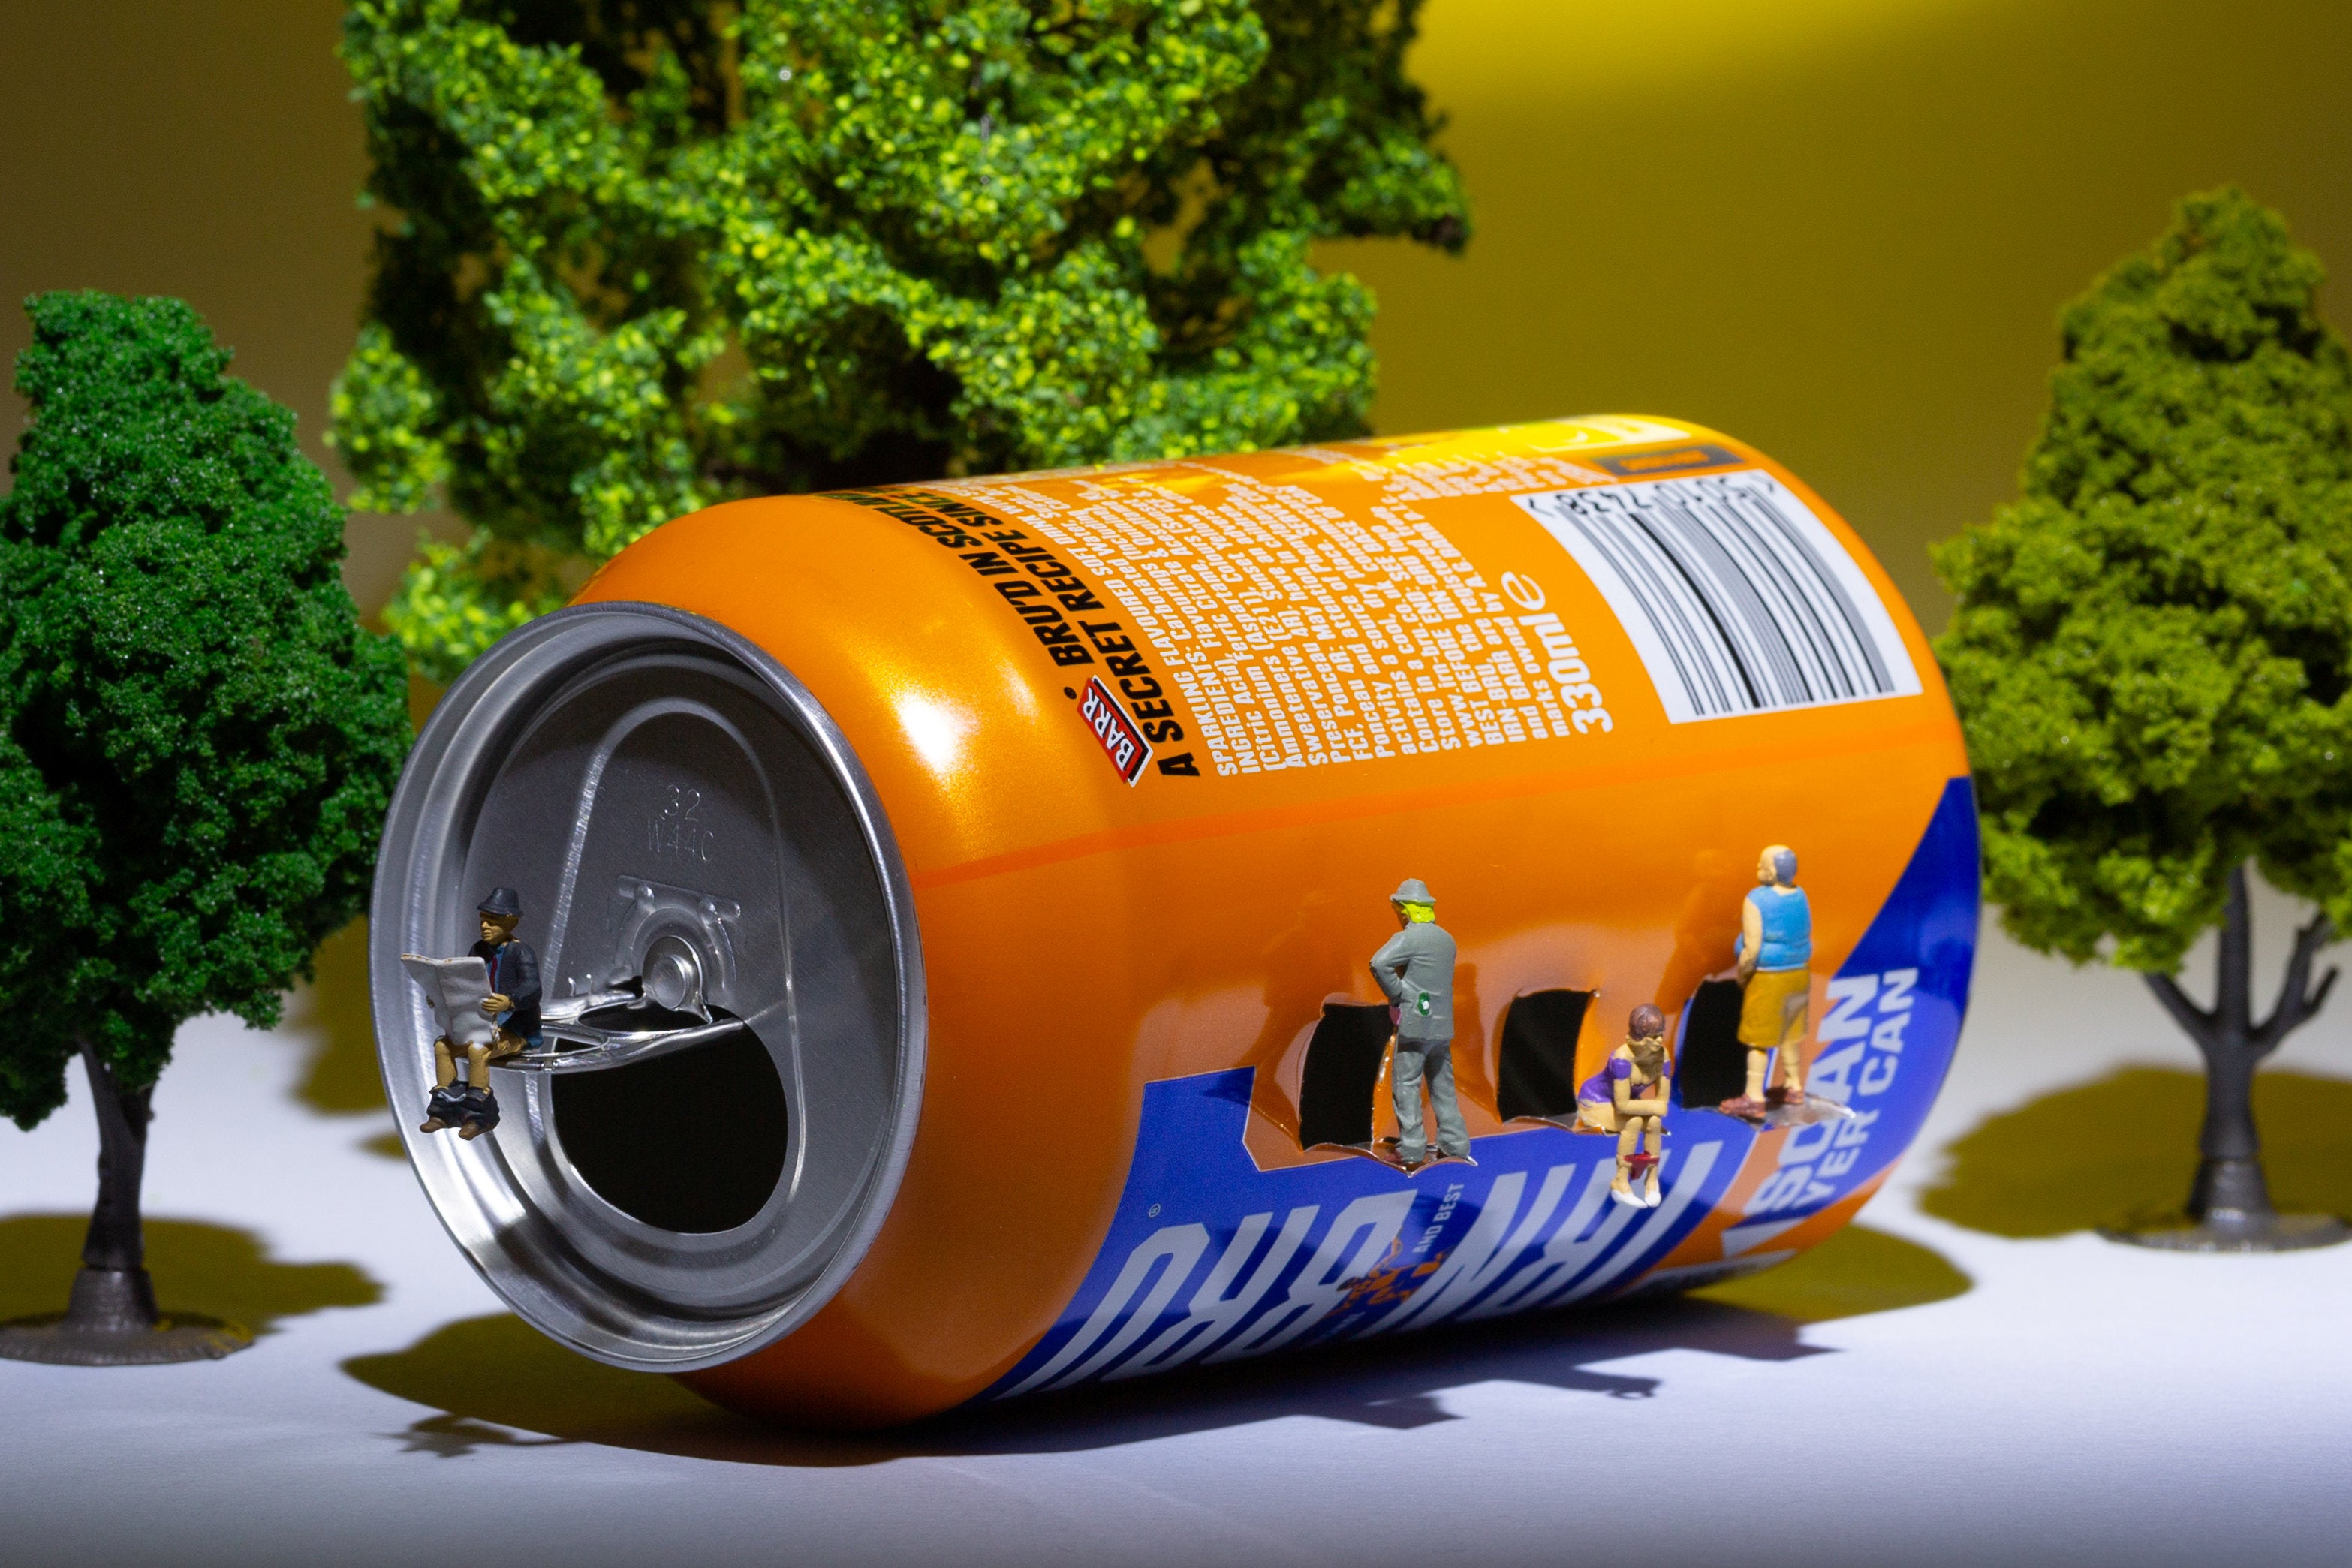 The artist turns a can into an Irn-Bru loo